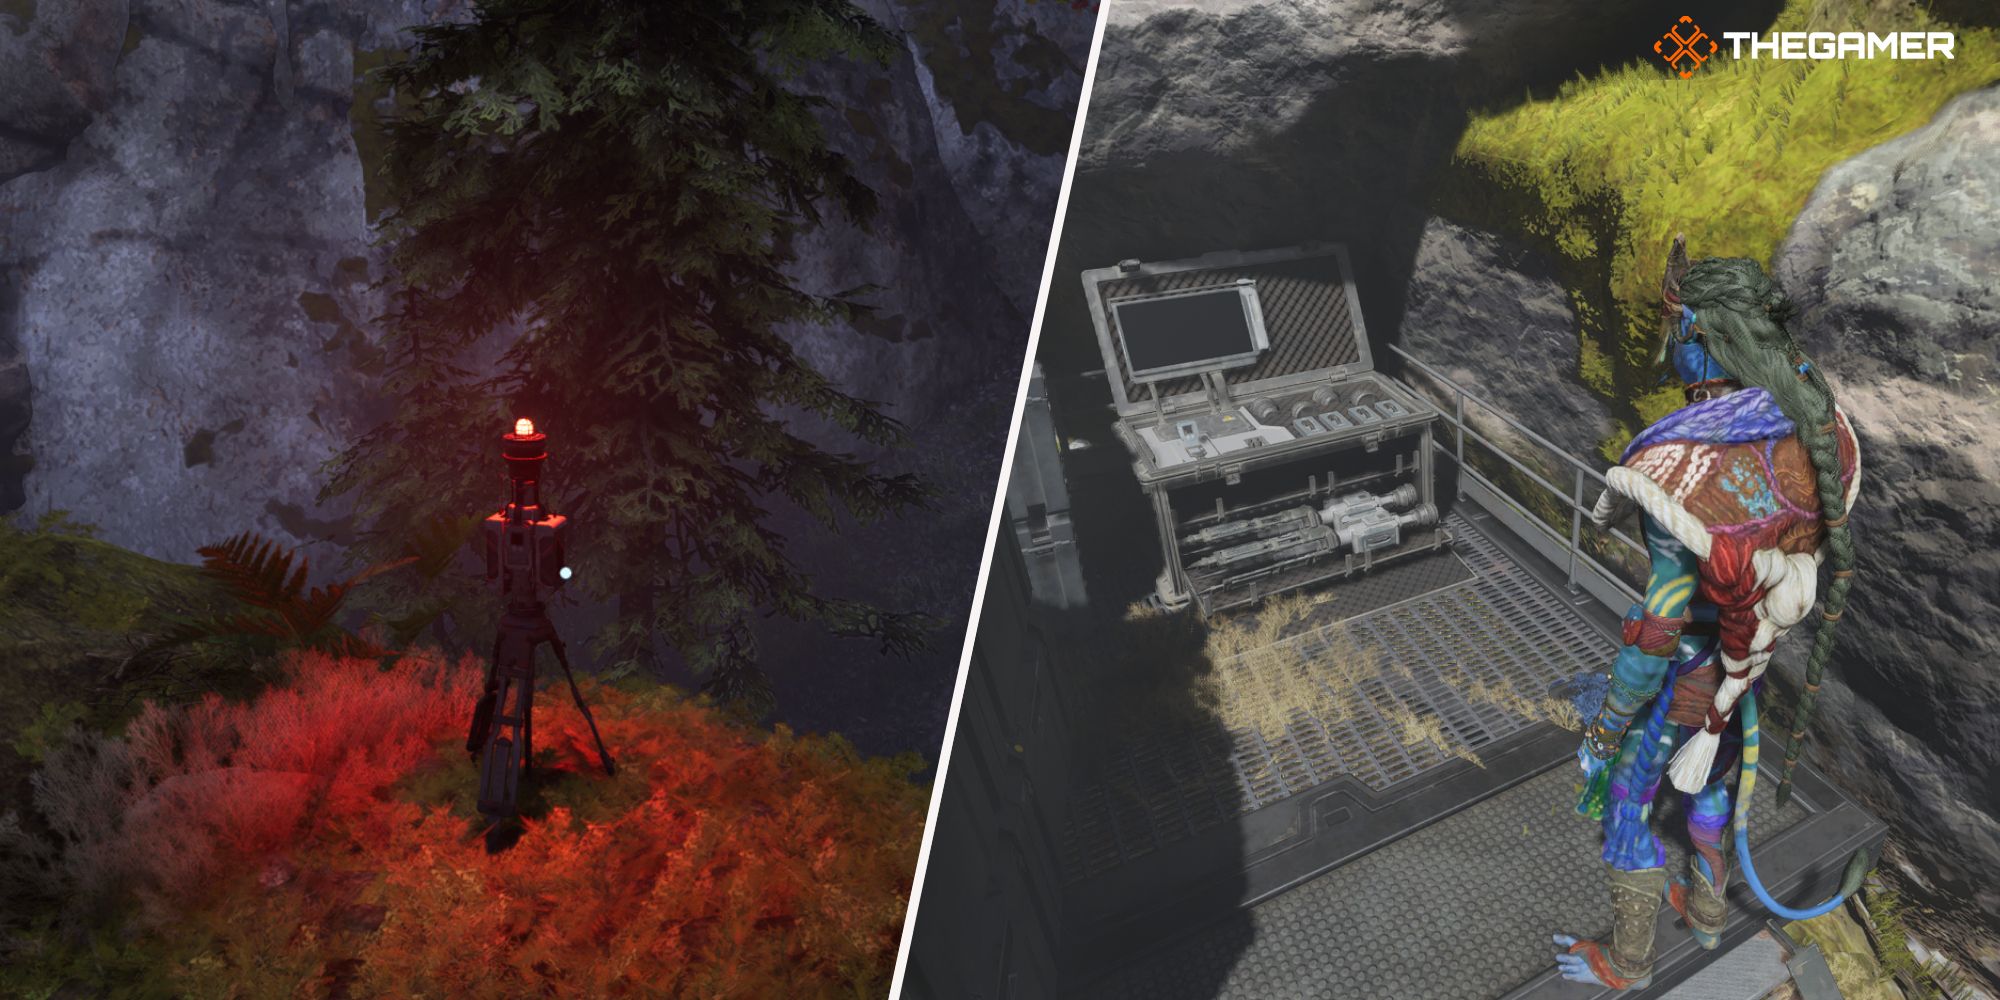 Right: Player standing next to a terminal station - Left: a picture of an antenna Avatar Frontiers of Pandora